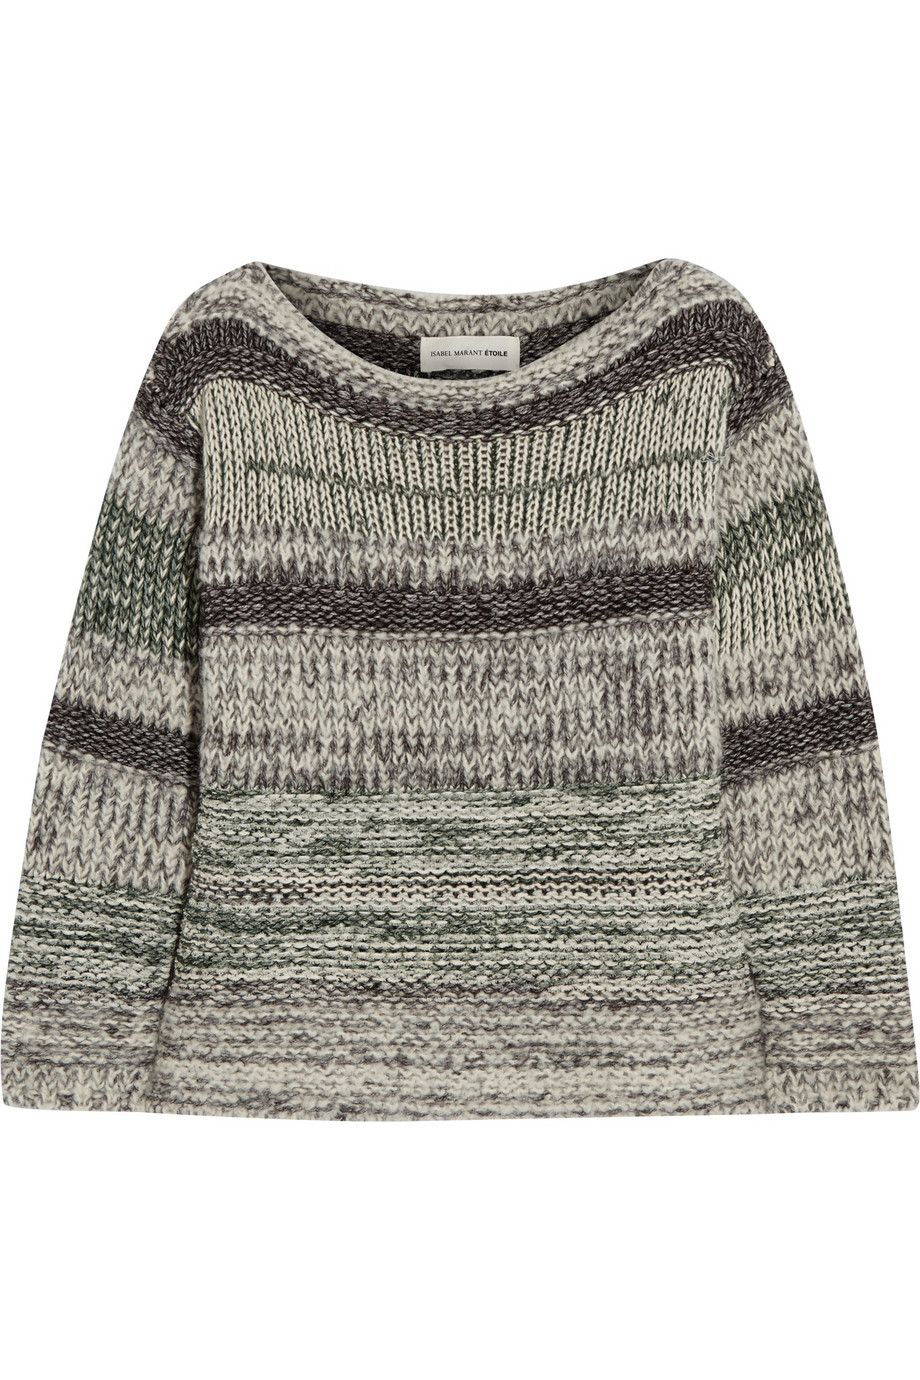 Étoile isabel marant Pit Striped Cotton-blend Sweater in Green | Lyst